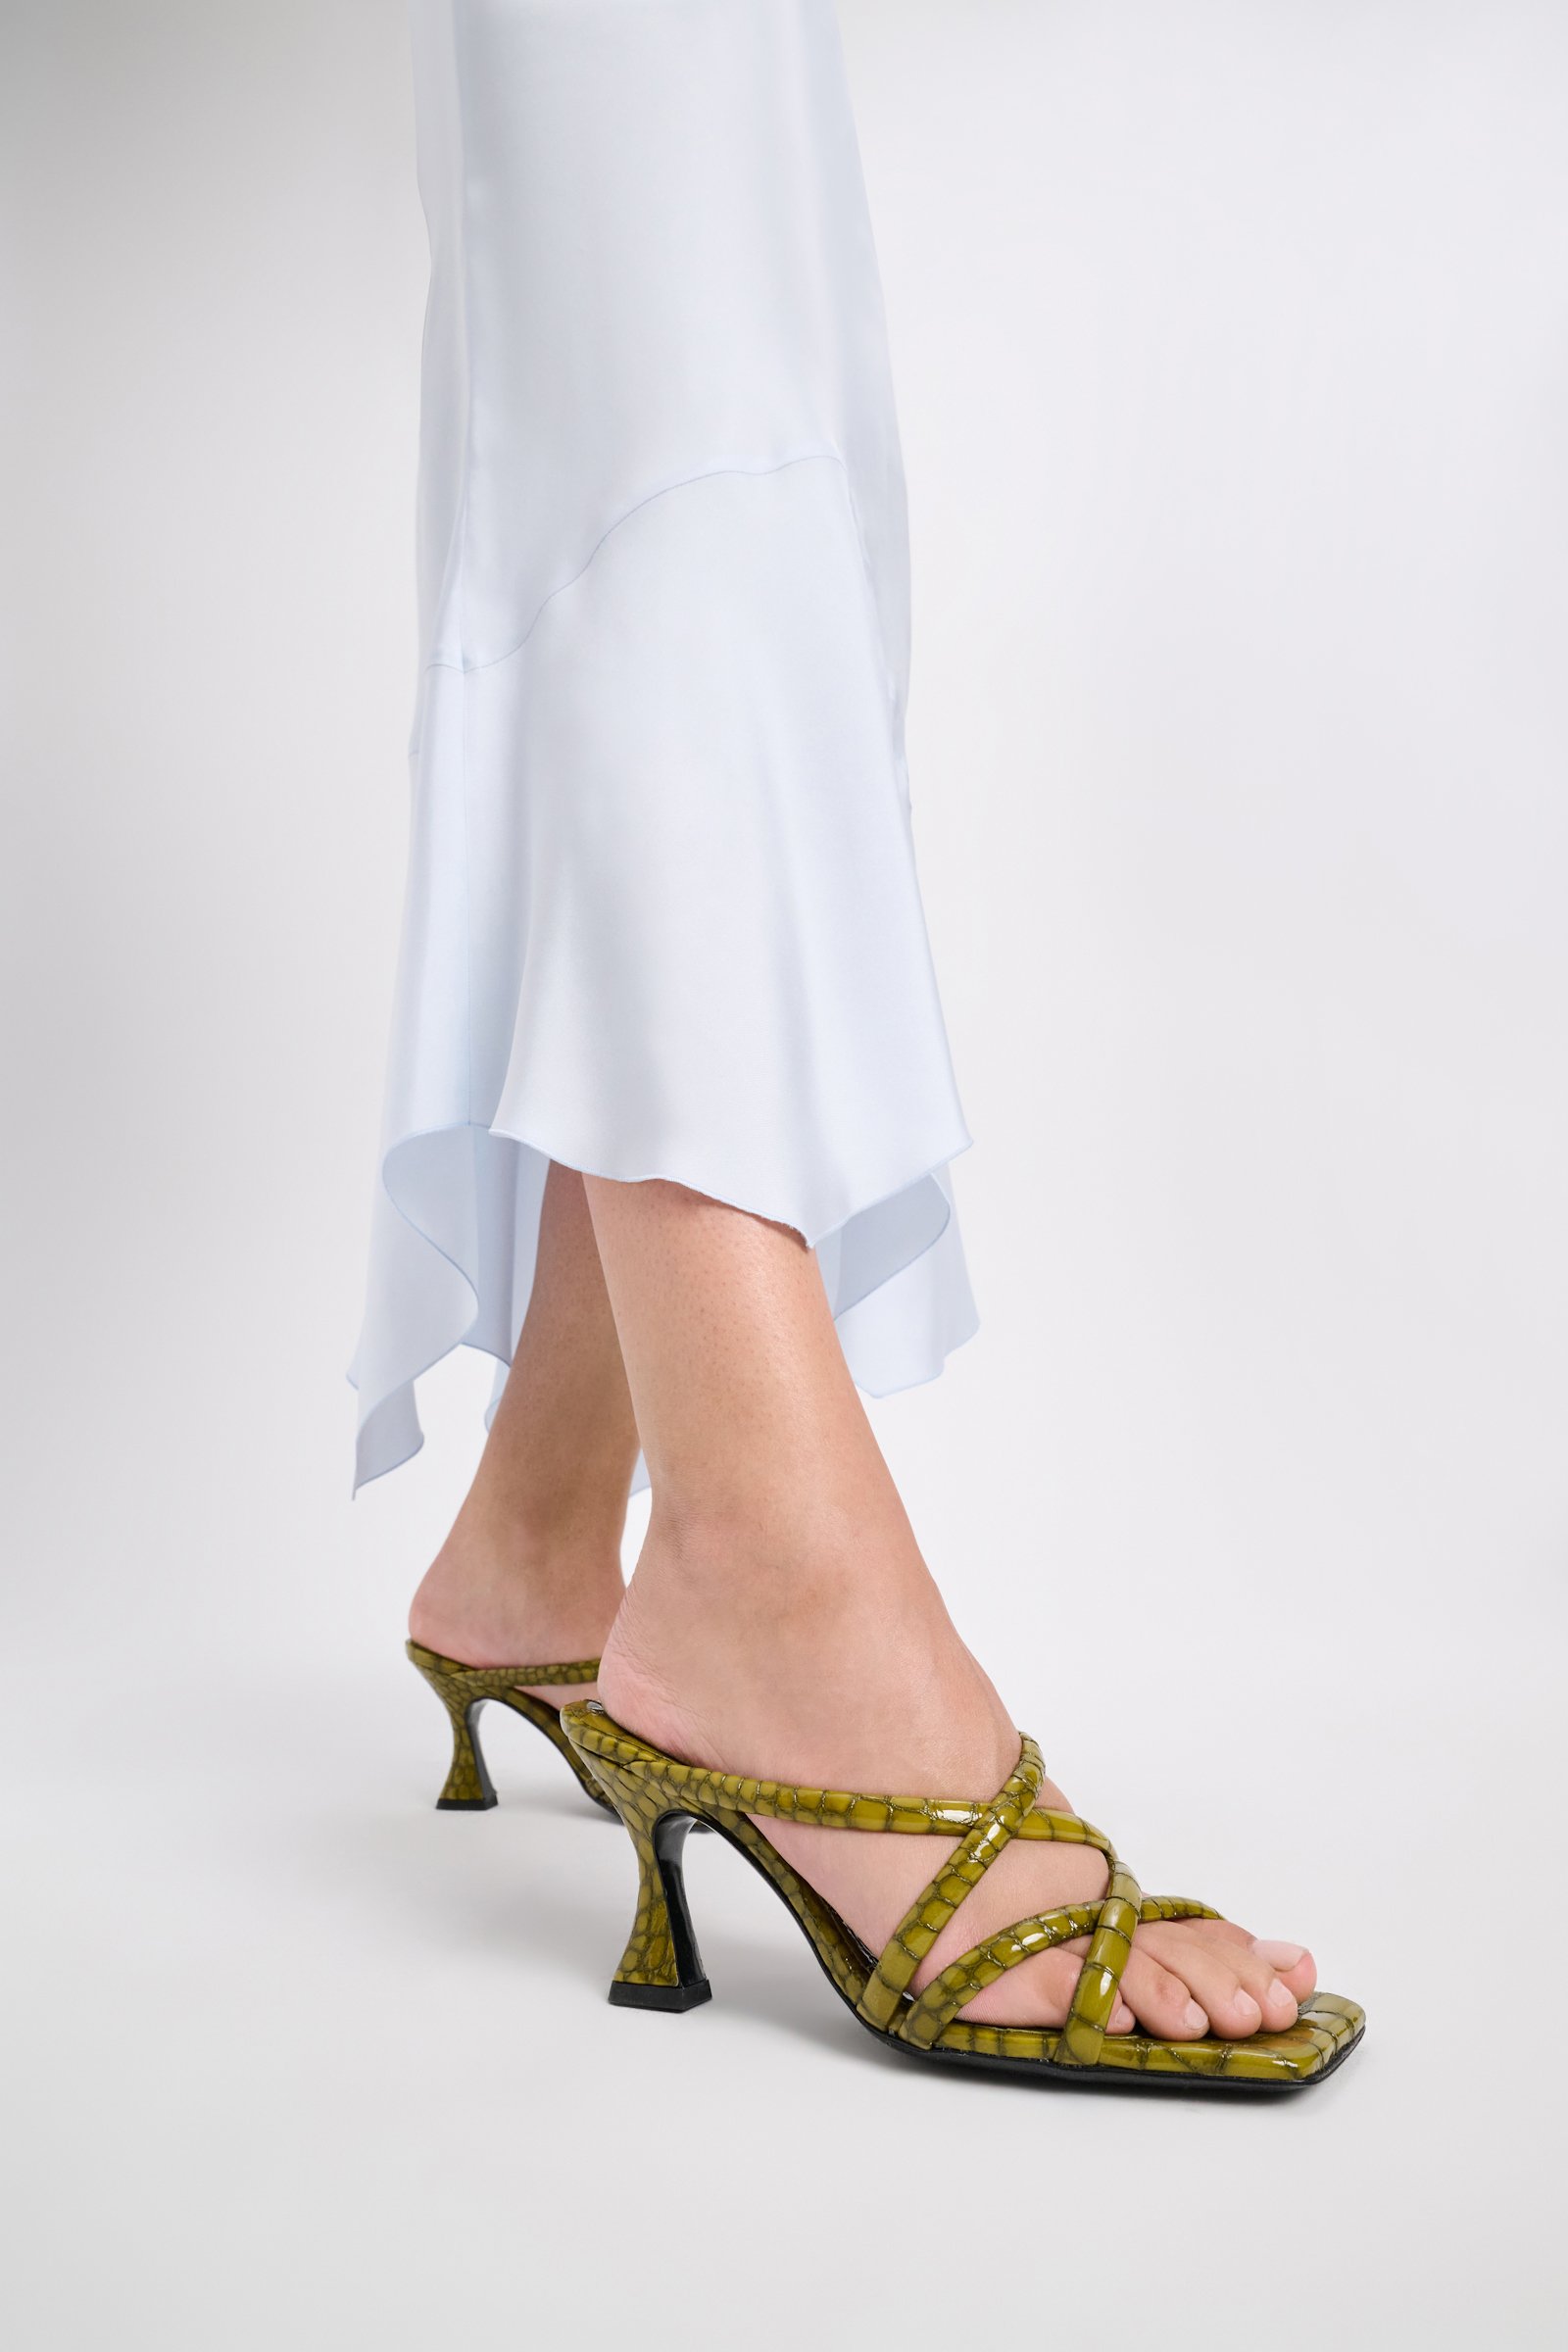 Dorothee Schumacher Square toe flared heel strappy sandals shimmering green